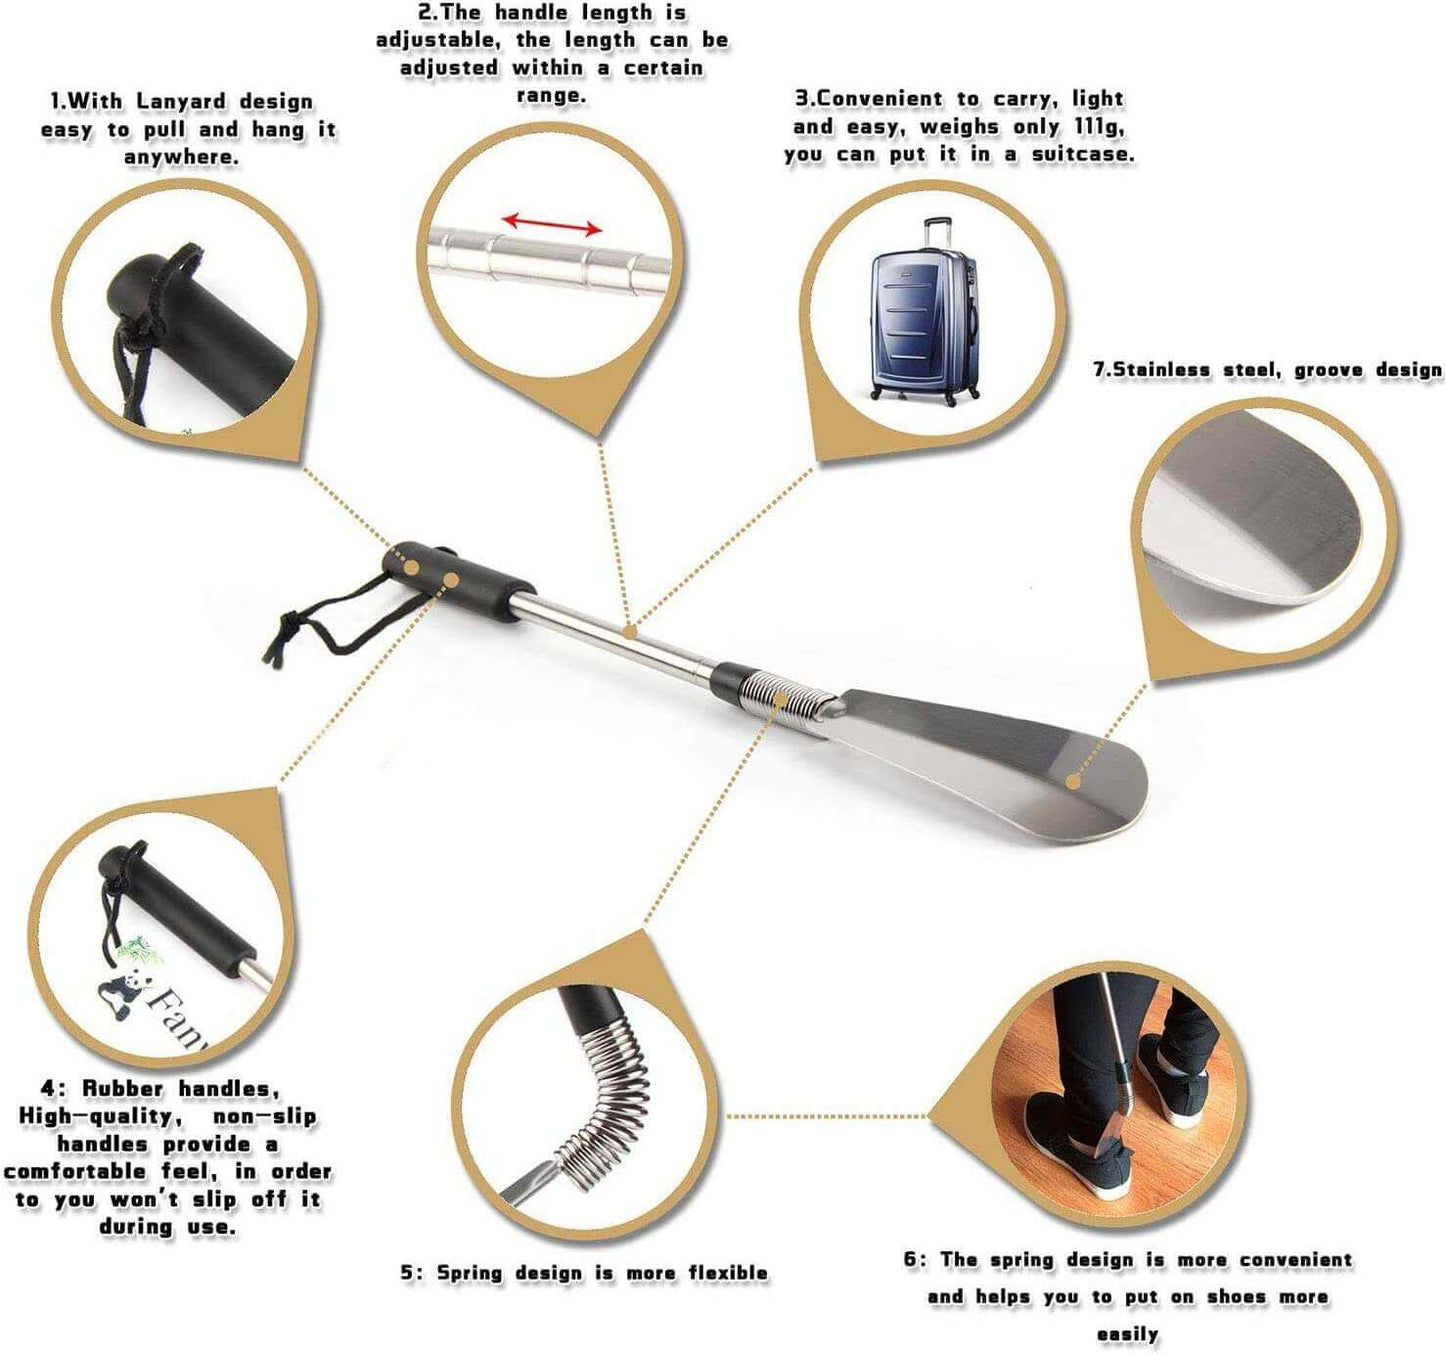 Premium Metal Shoe Horn with Long Handle, Made of Stainless Steel, product details explanation